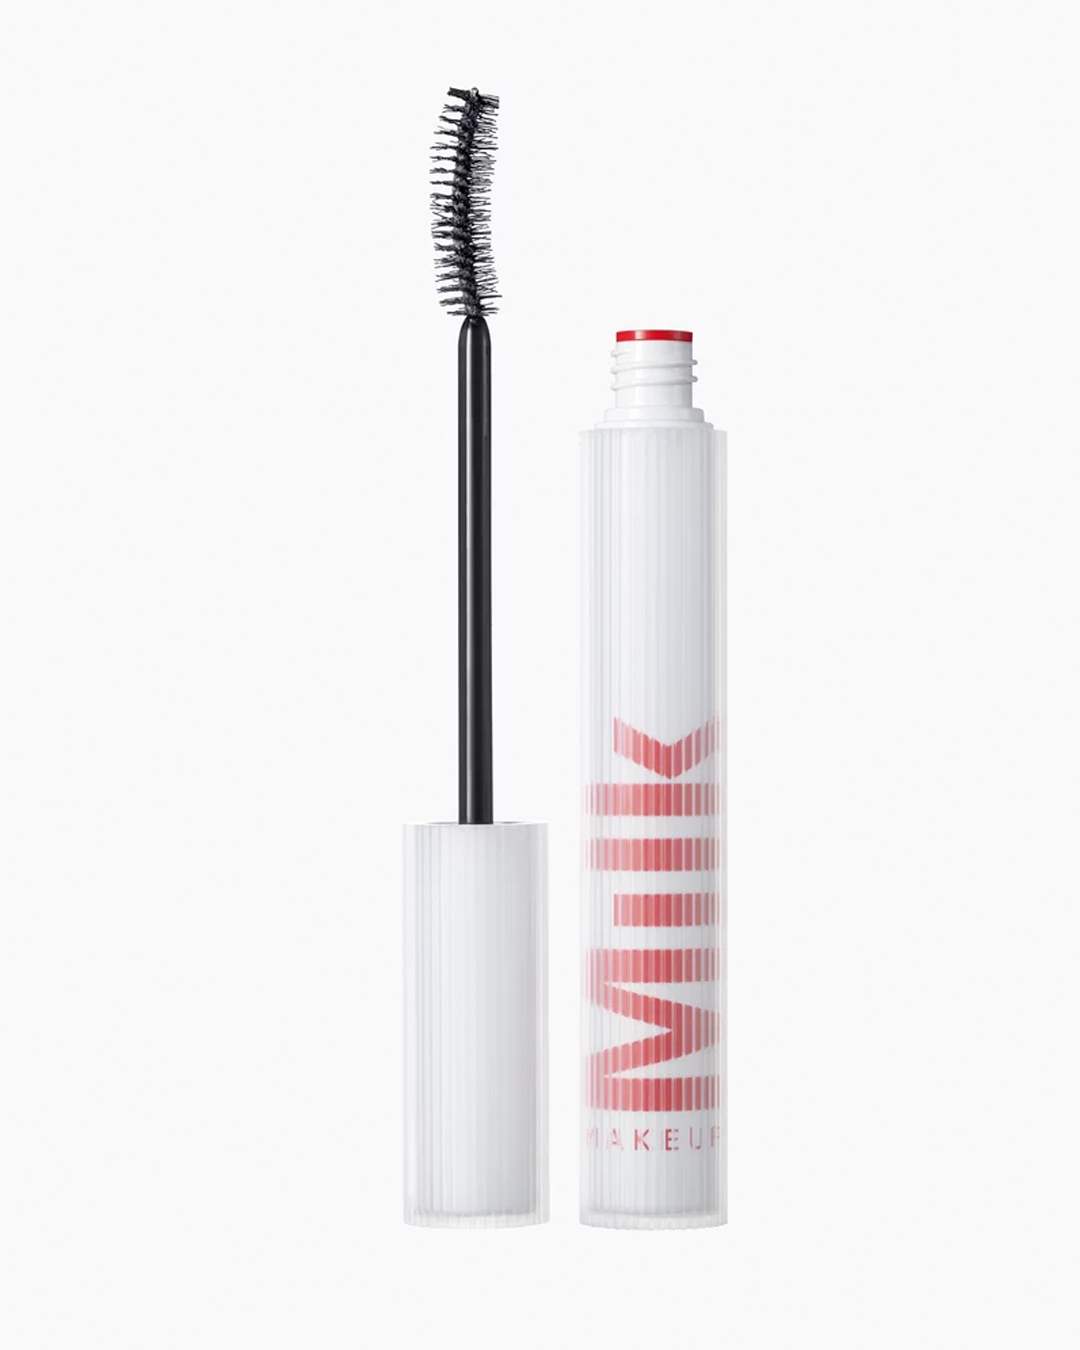 mascara with lid off